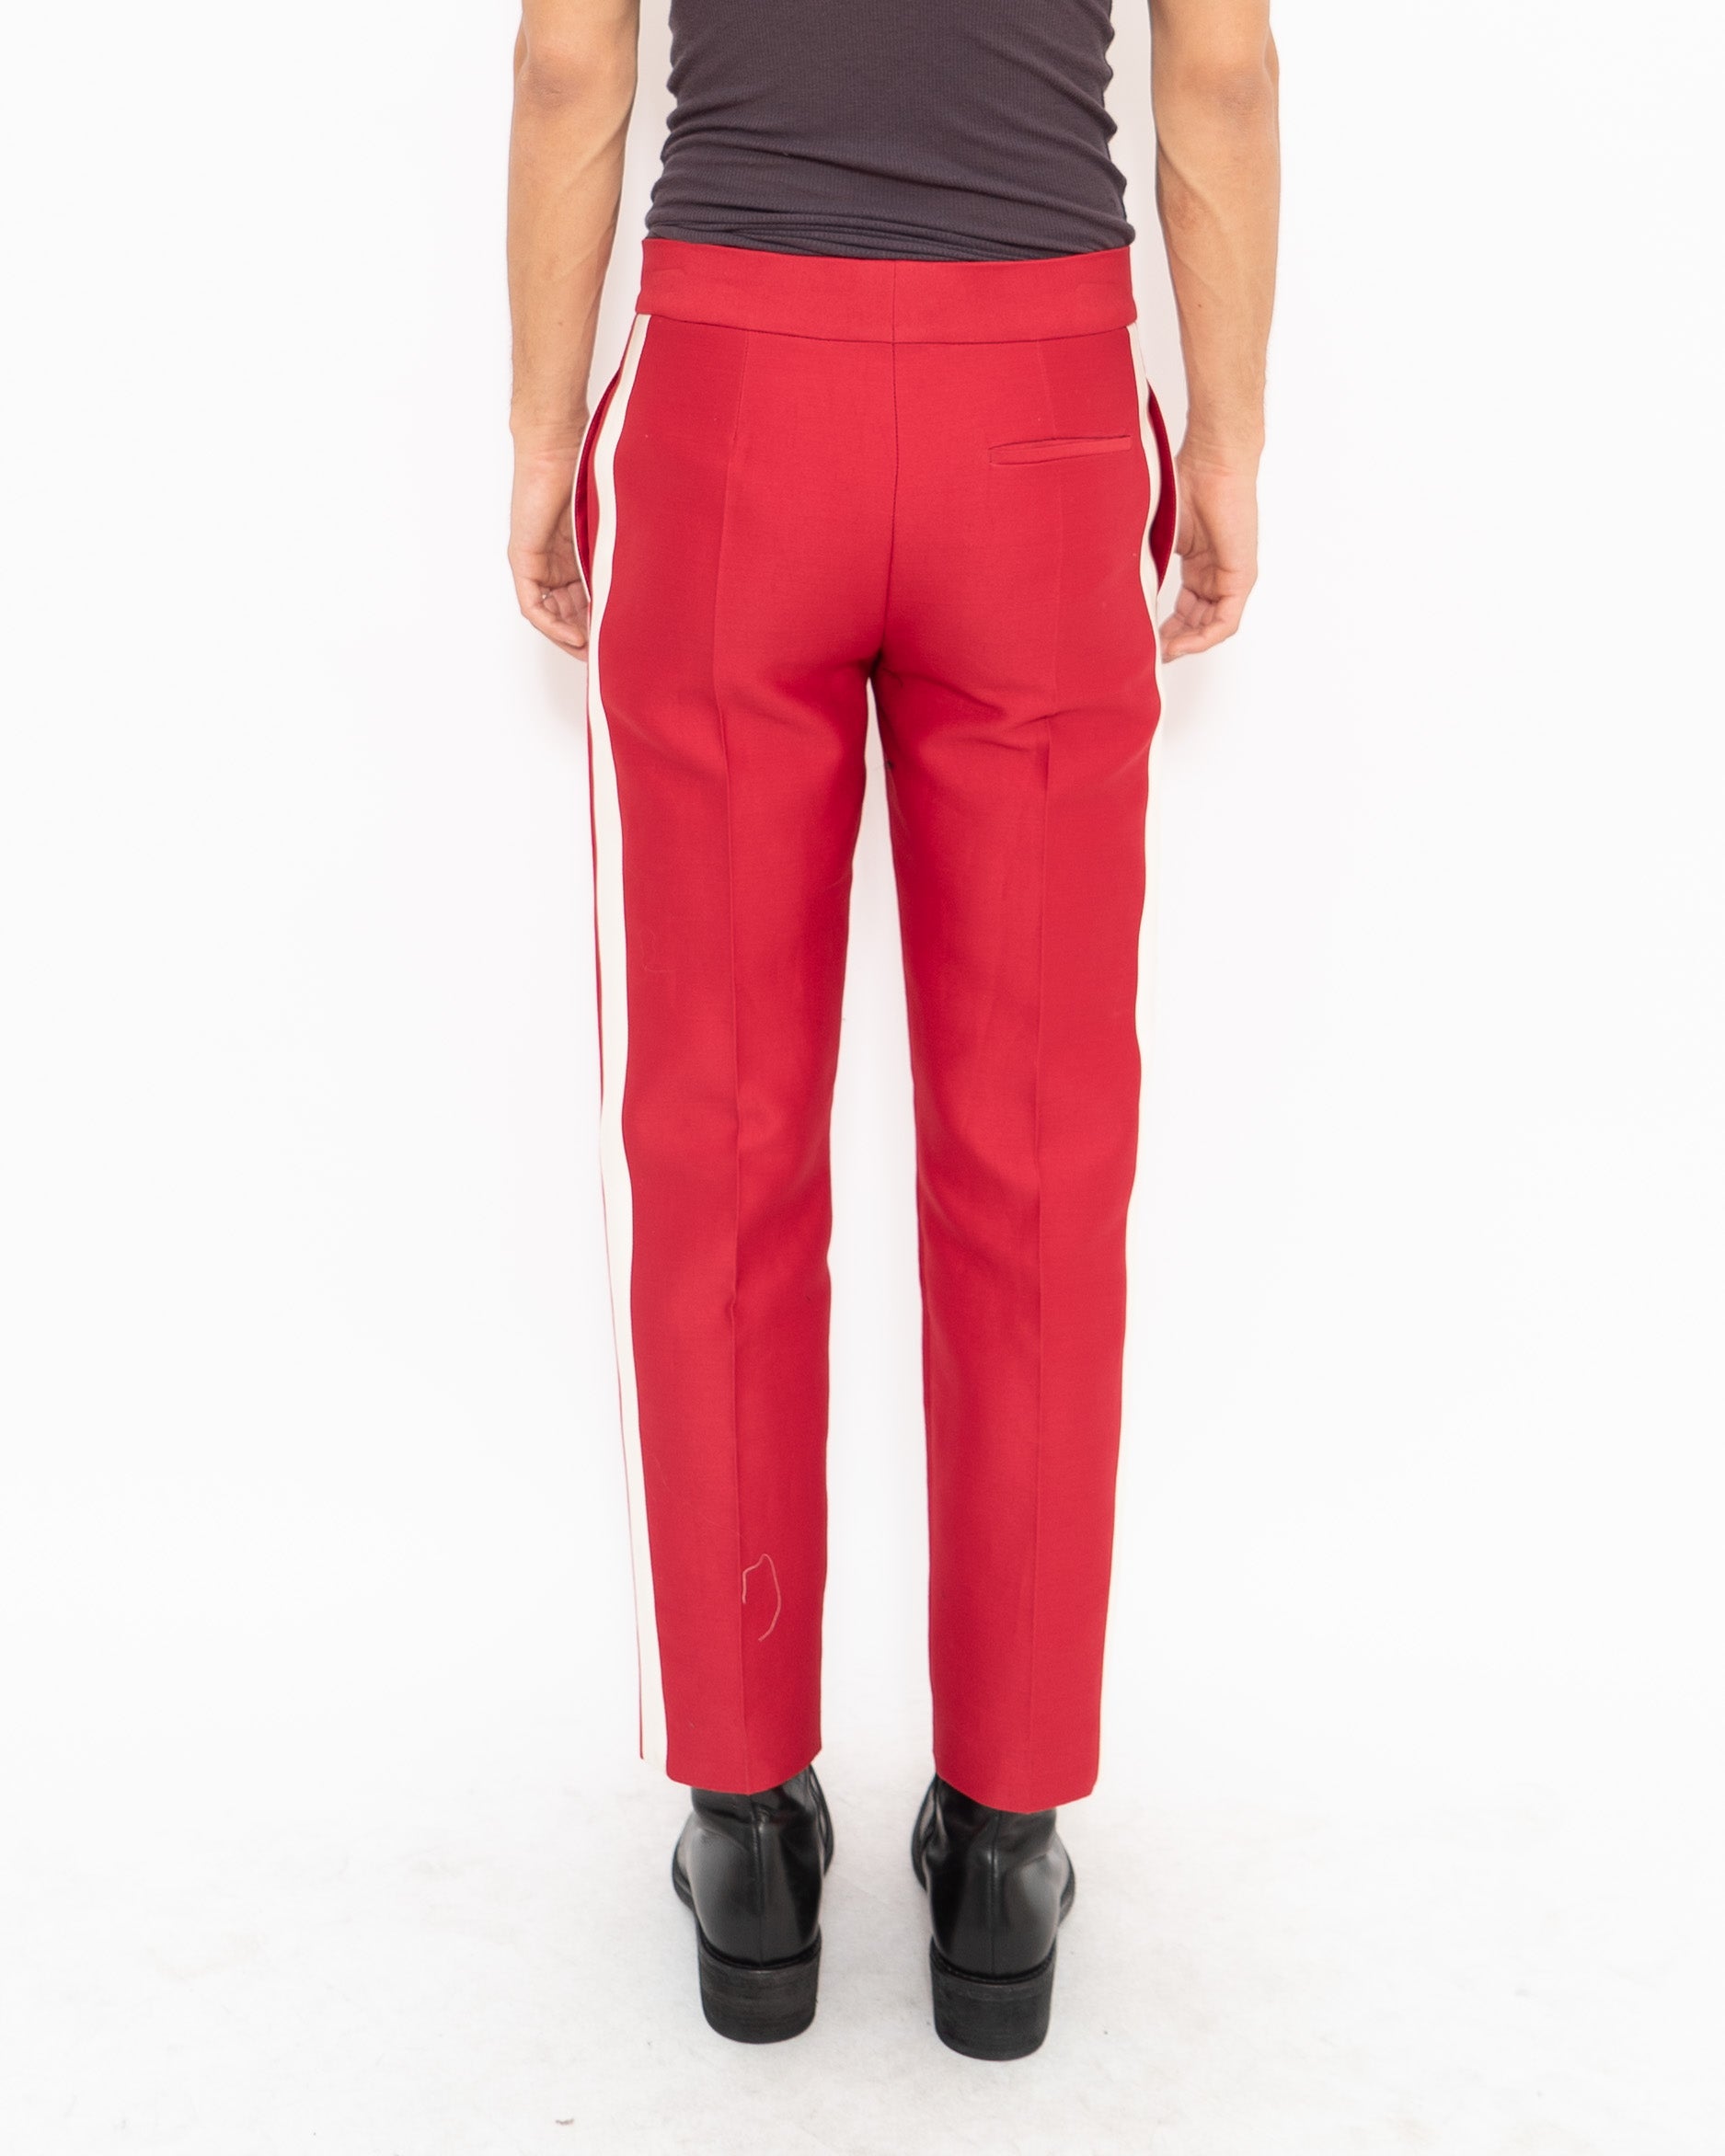 FW18 Weddel Red Striped Trousers Sample